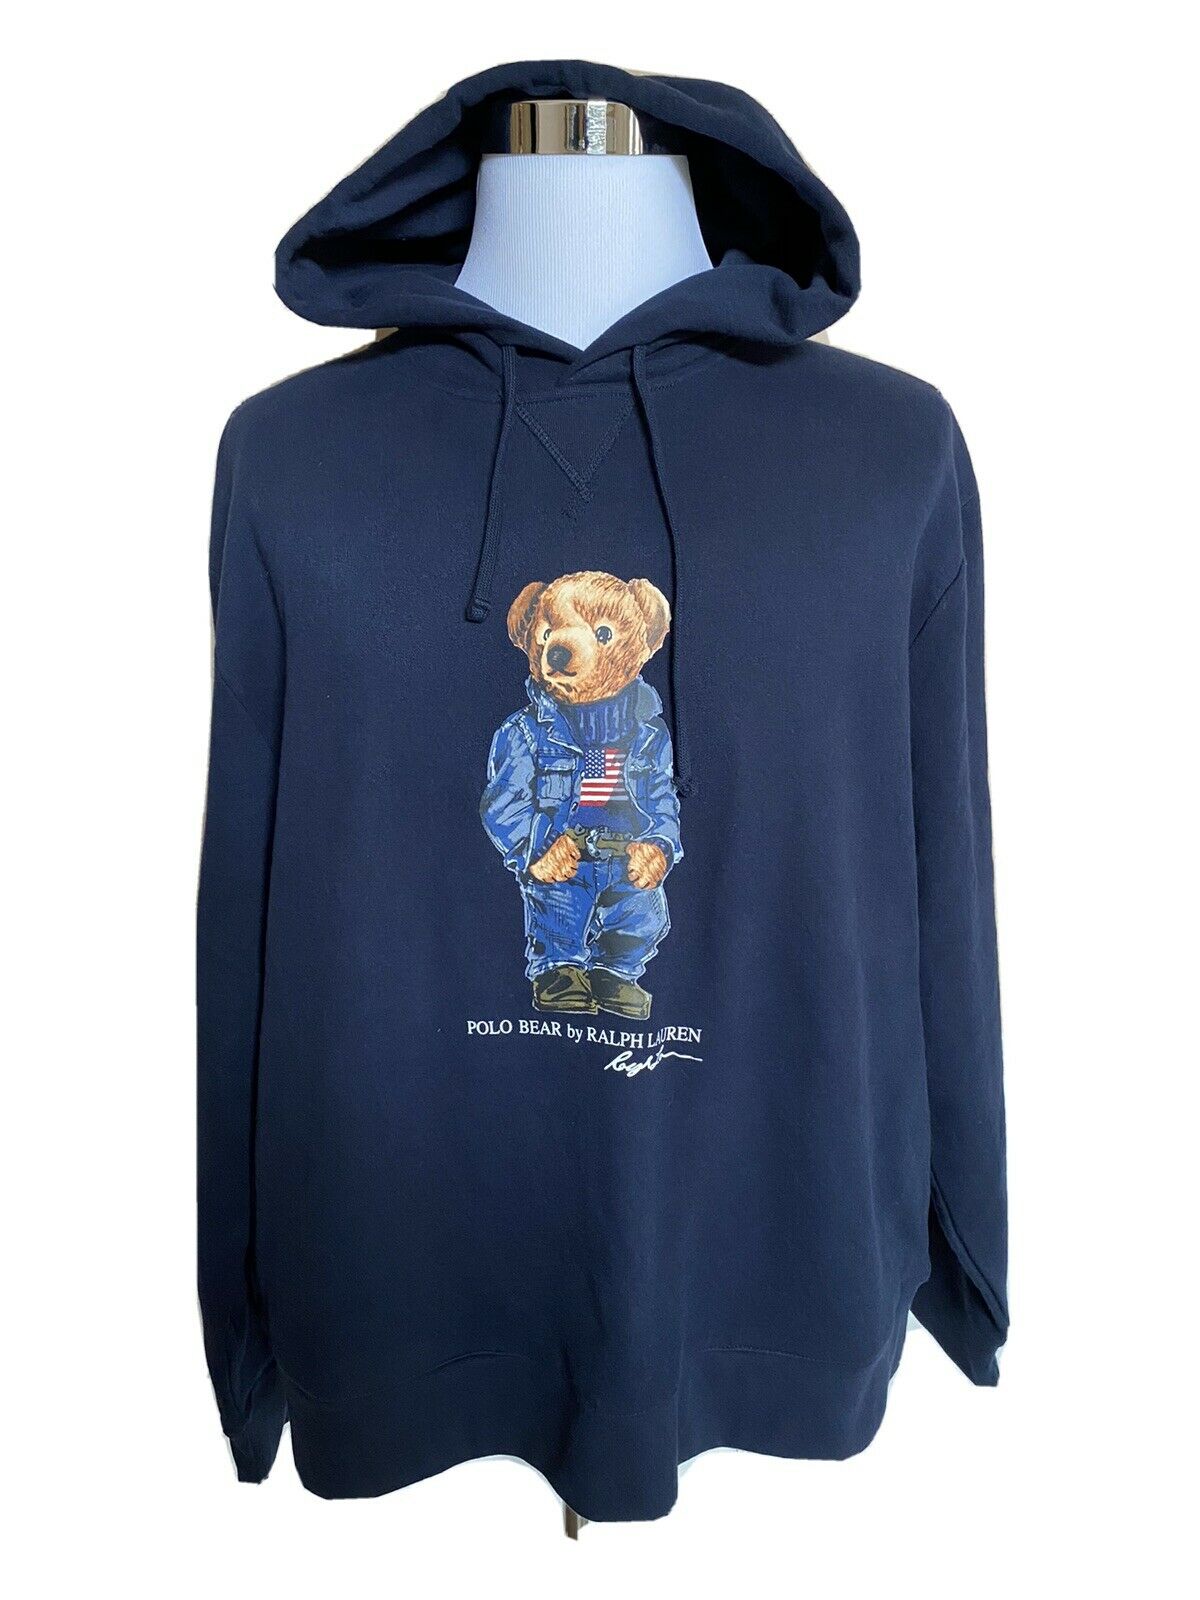 NWT $109.99 Polo Ralph Lauren Iconic Bear Navy Blue Sweater with Hoodie 1XB